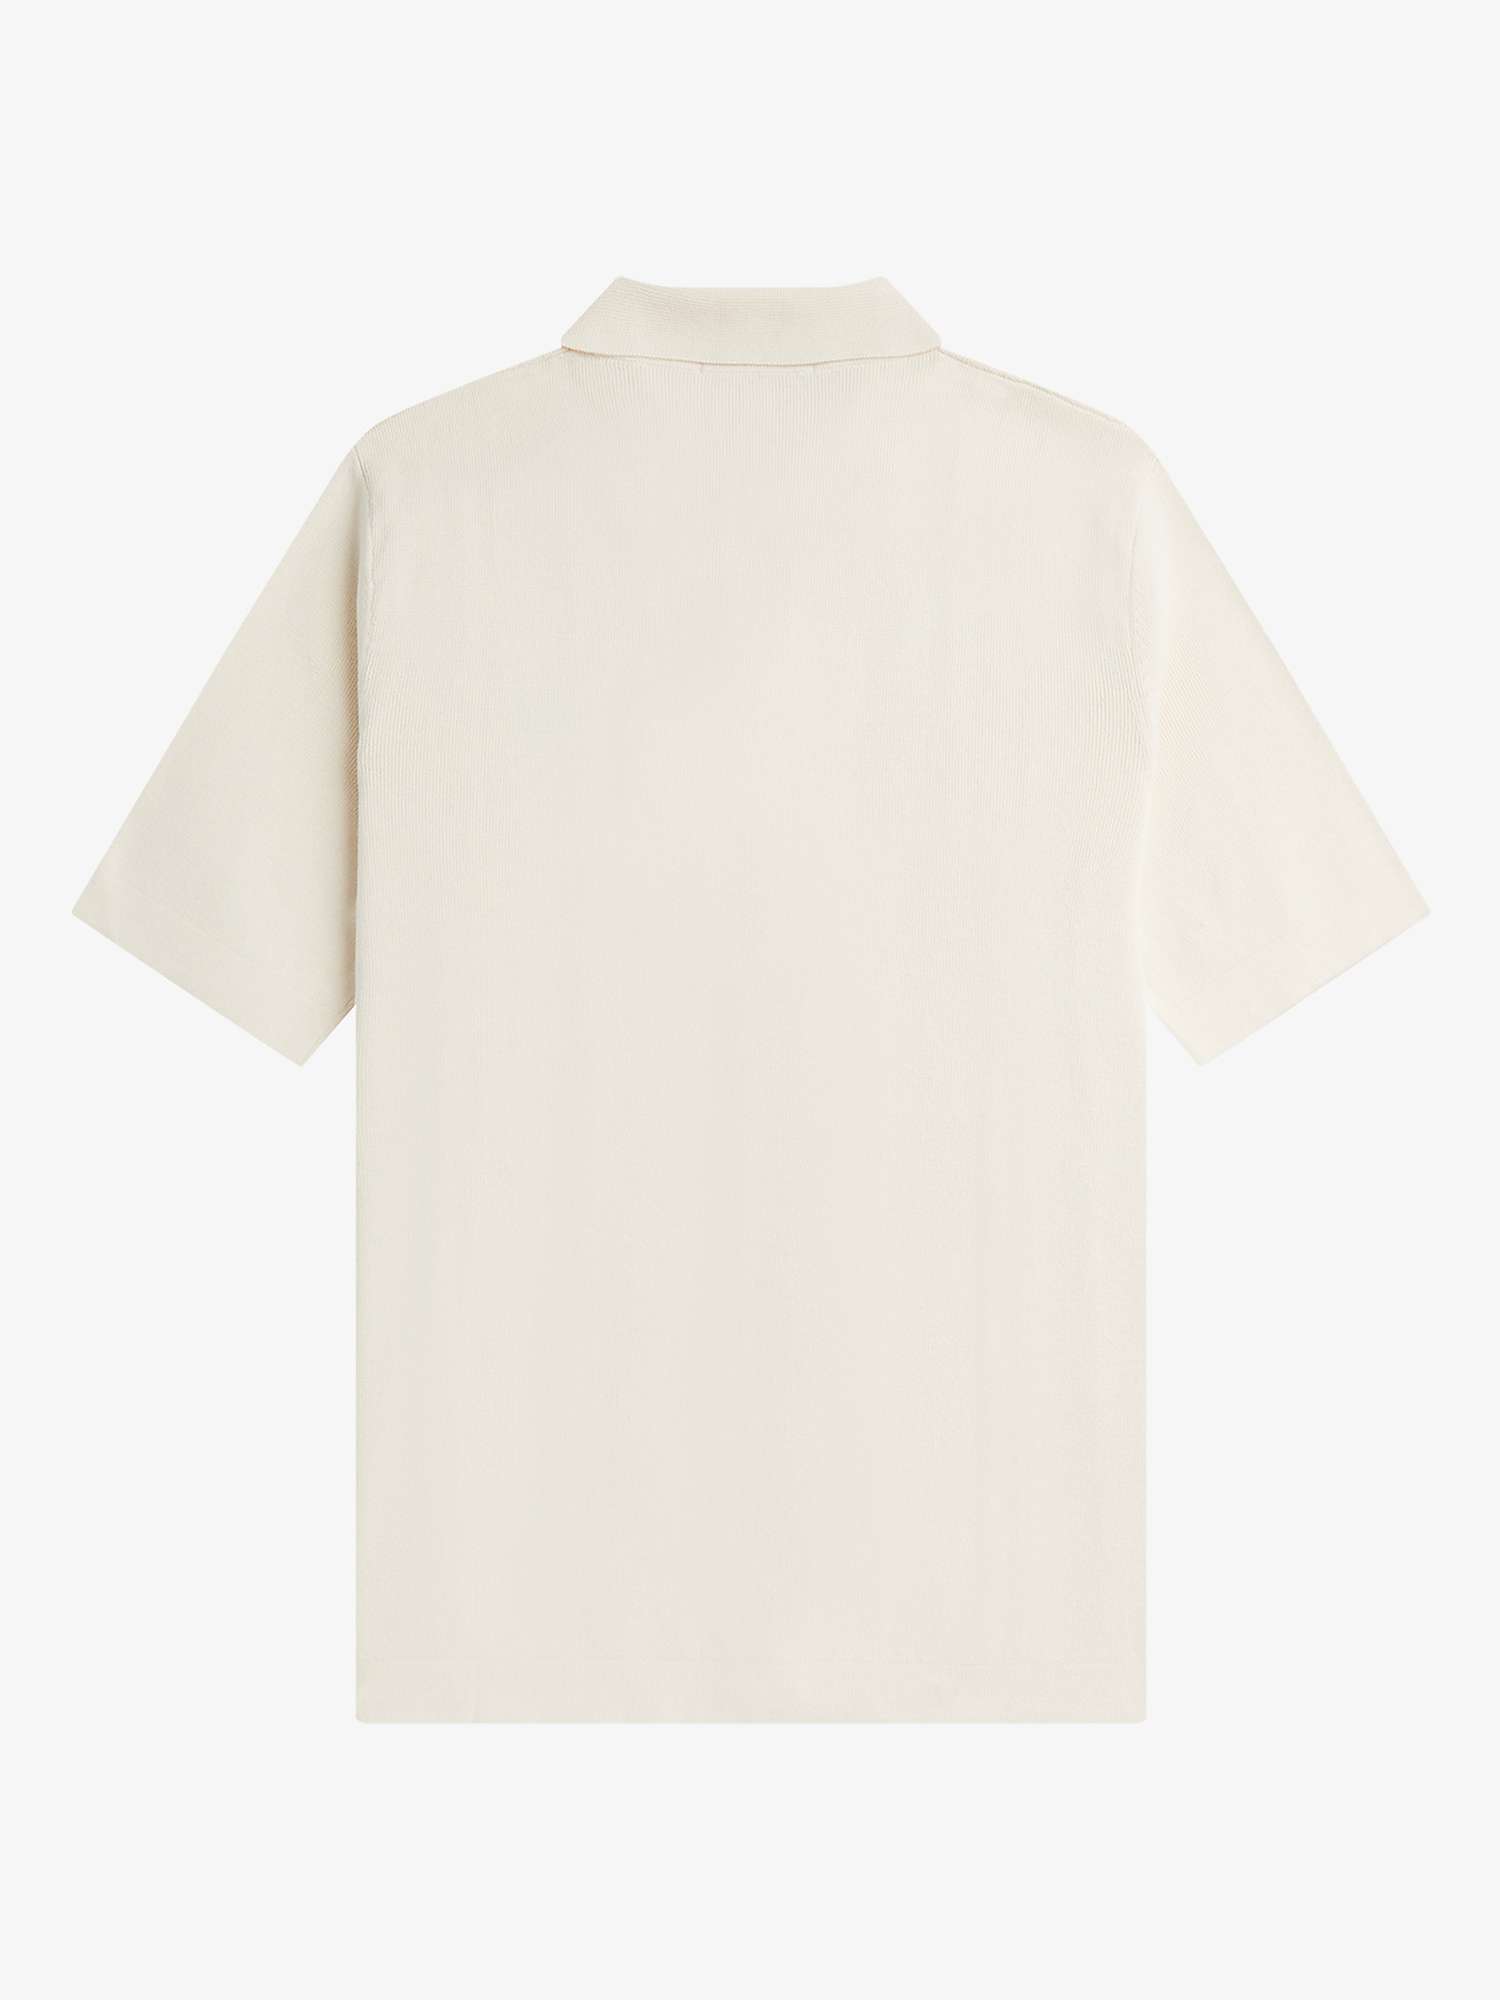 Buy Fred Perry Button Knit Shirt, Ecru Online at johnlewis.com